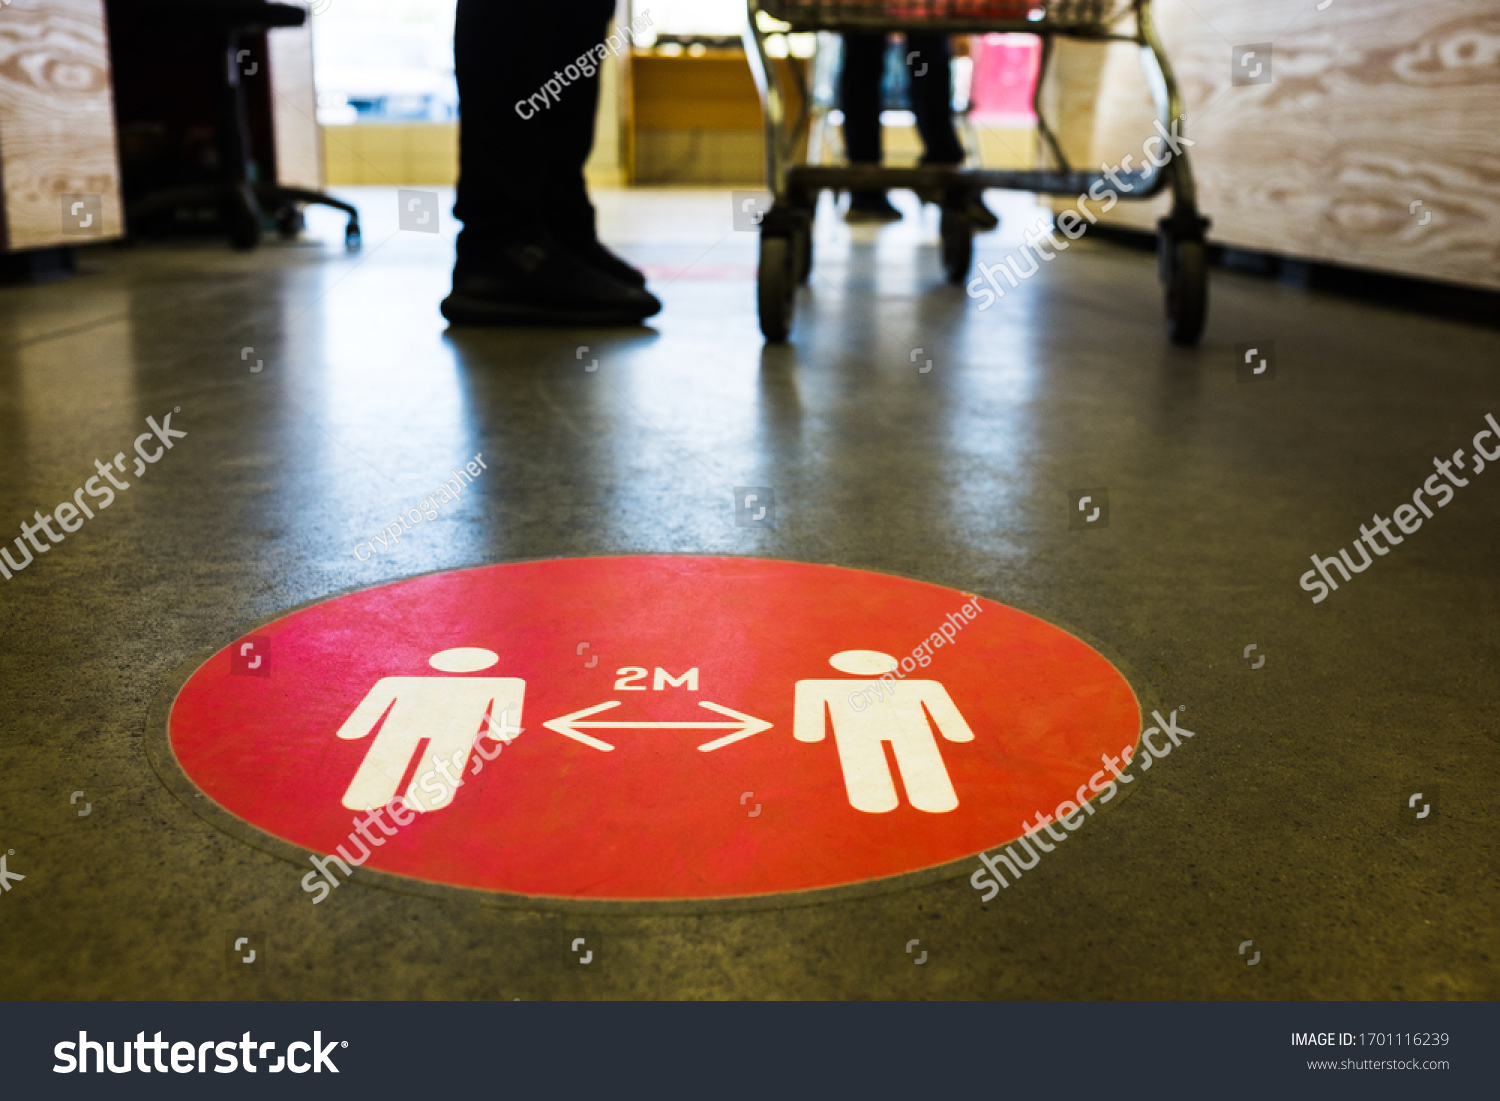 Red round sign printed on ground at supermarket cash desk register informing people to keep 2 meter 6 feet distance from each other,prevent spreading Coronavirus COVID-19 virus disease infection,UKUS #1701116239